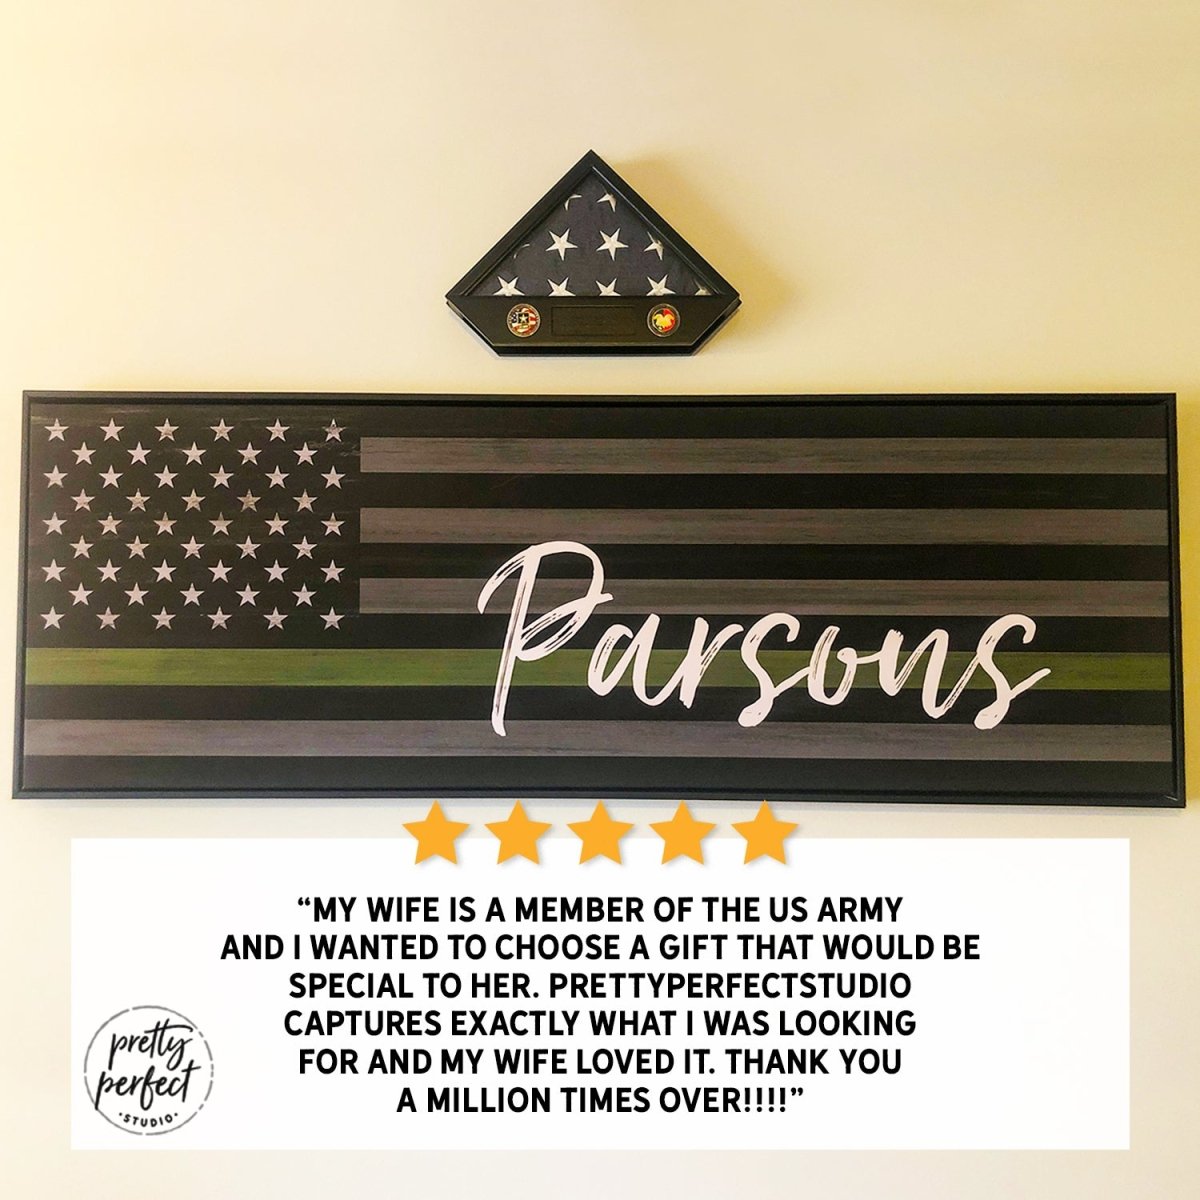 Customer product review for personalized US military flag sign by Pretty Perfect Studio